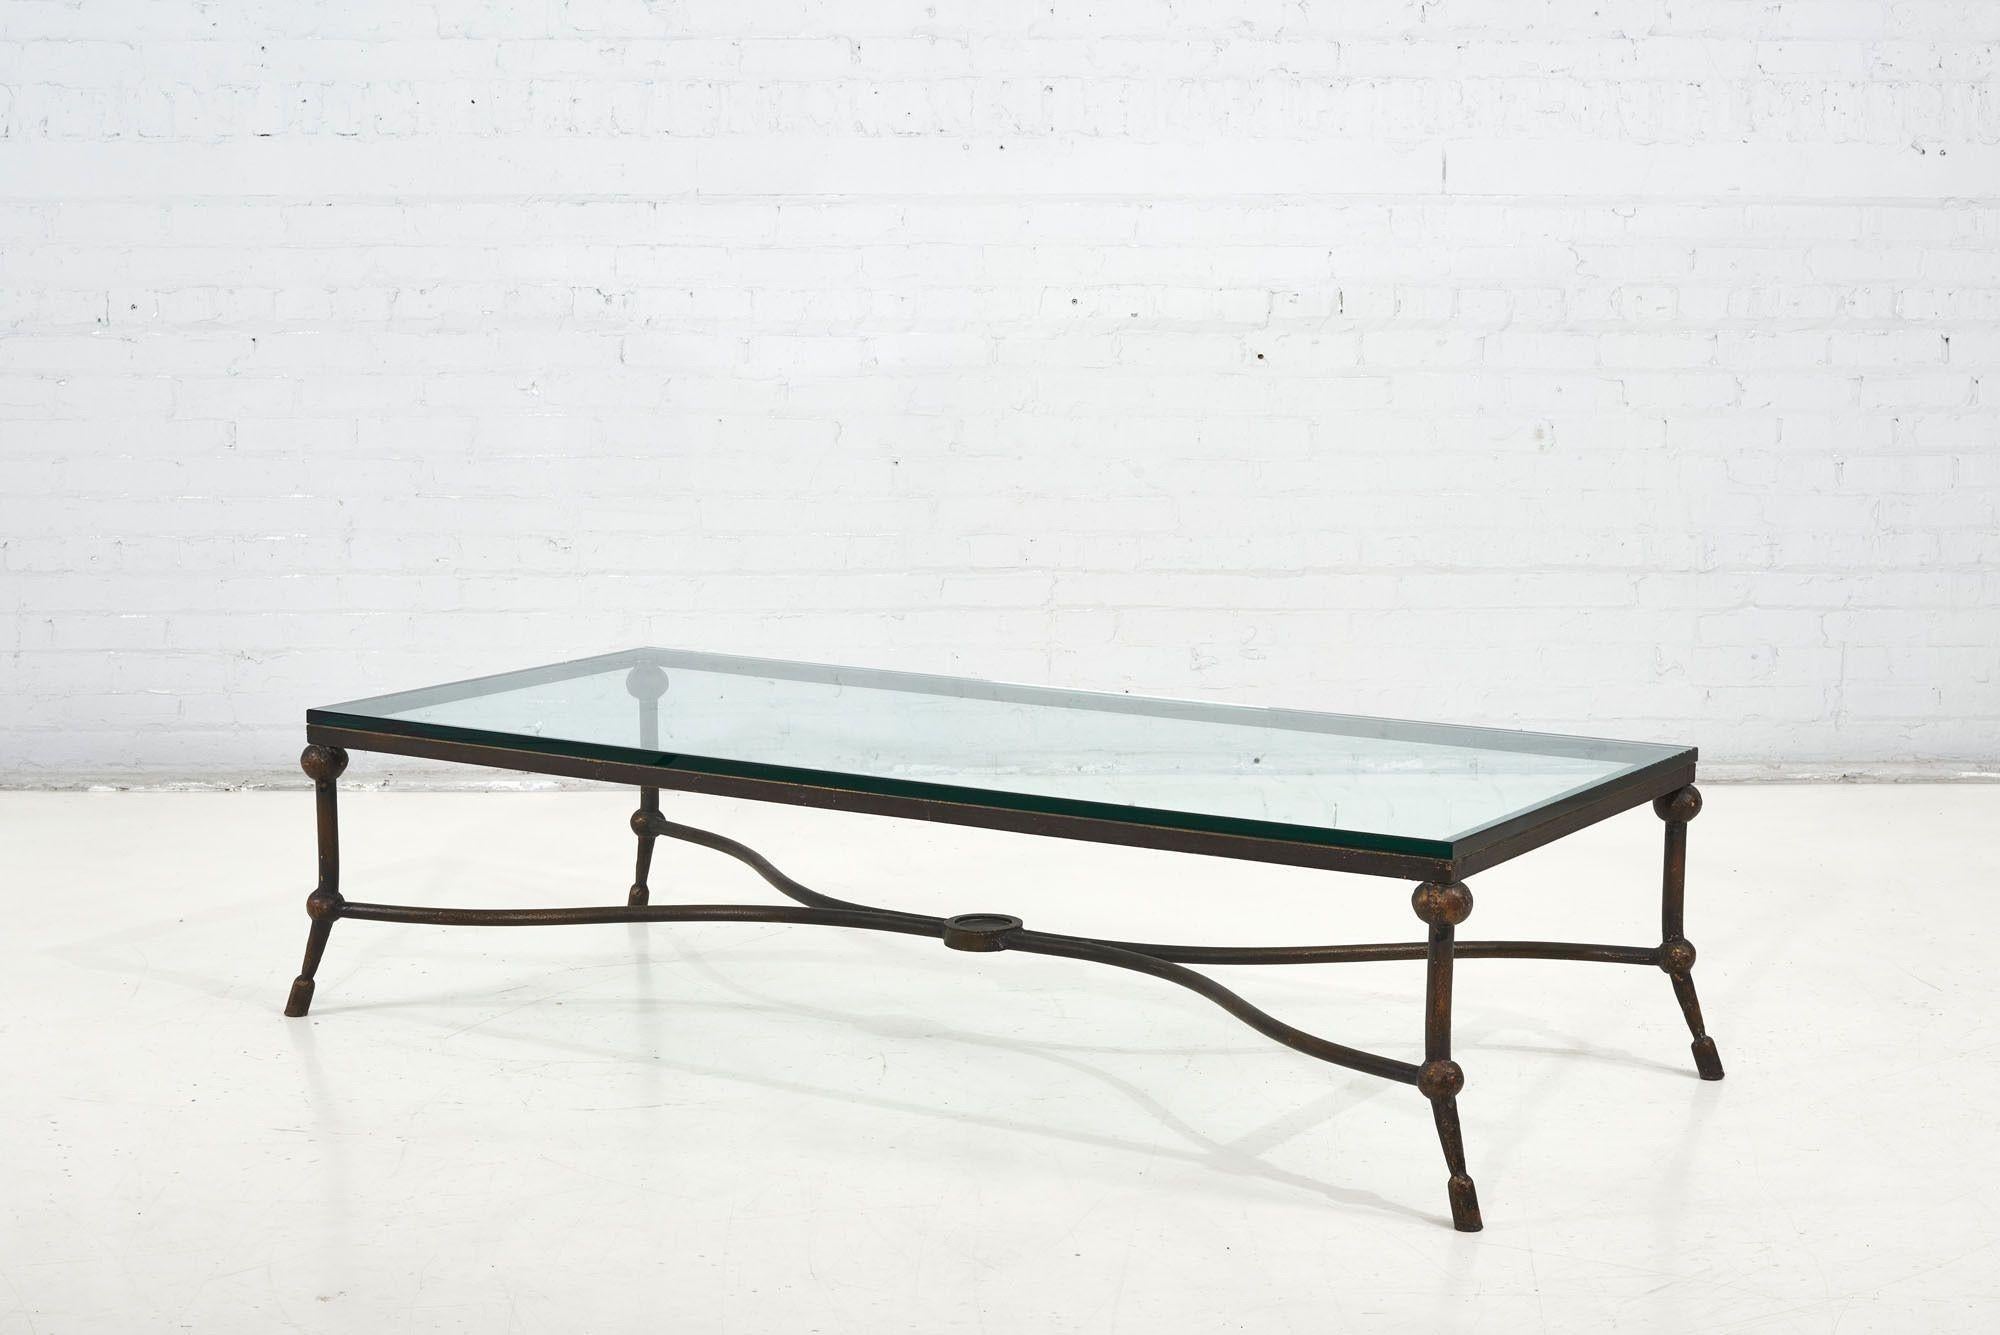 Diego Giacometti style coffee table. Bronze color finish over metal with glass top.